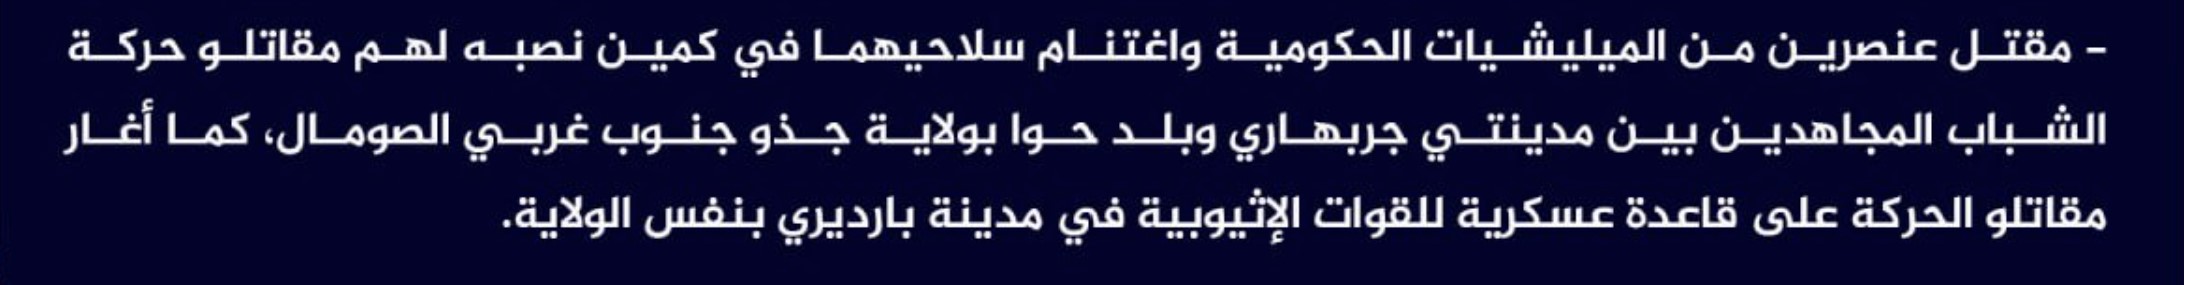 (Claim) al-Shabaab Killed Two Somalian Forces and Seized Their Weapons in an Ambush Between Garbahare and Hawa Cities and Ambushed an Ethiopian Military Base in Bardere, Gedo, Southwestern Somalia